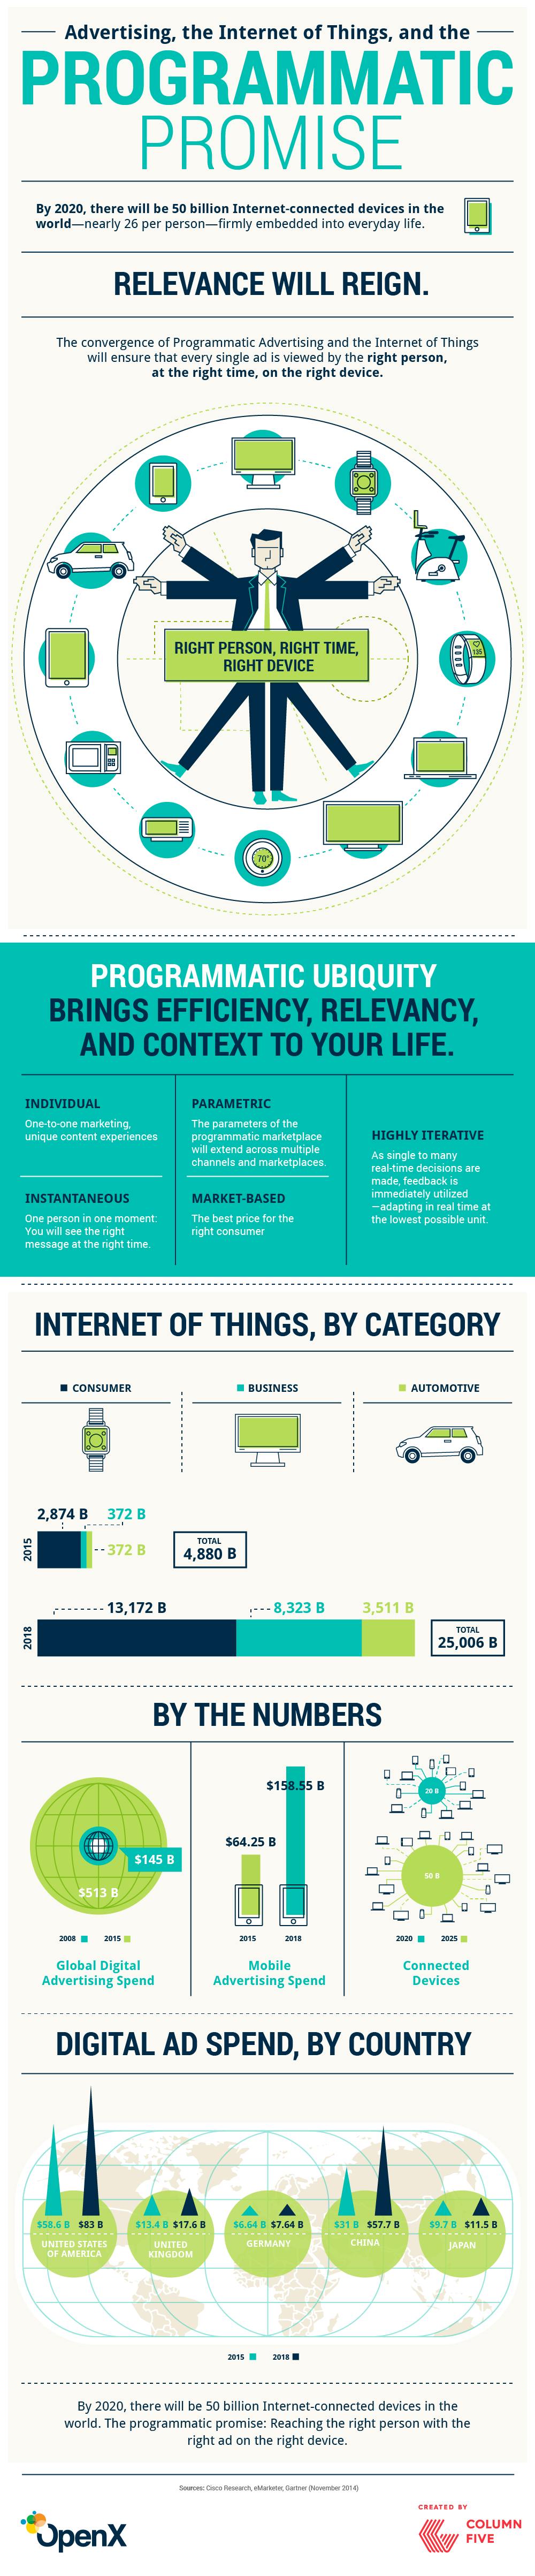 2015 10 02 OpenX Programmatic Advertising IoT Infographic - Advertising, the Internet of Things and the Programmatic Promise [Infographic]